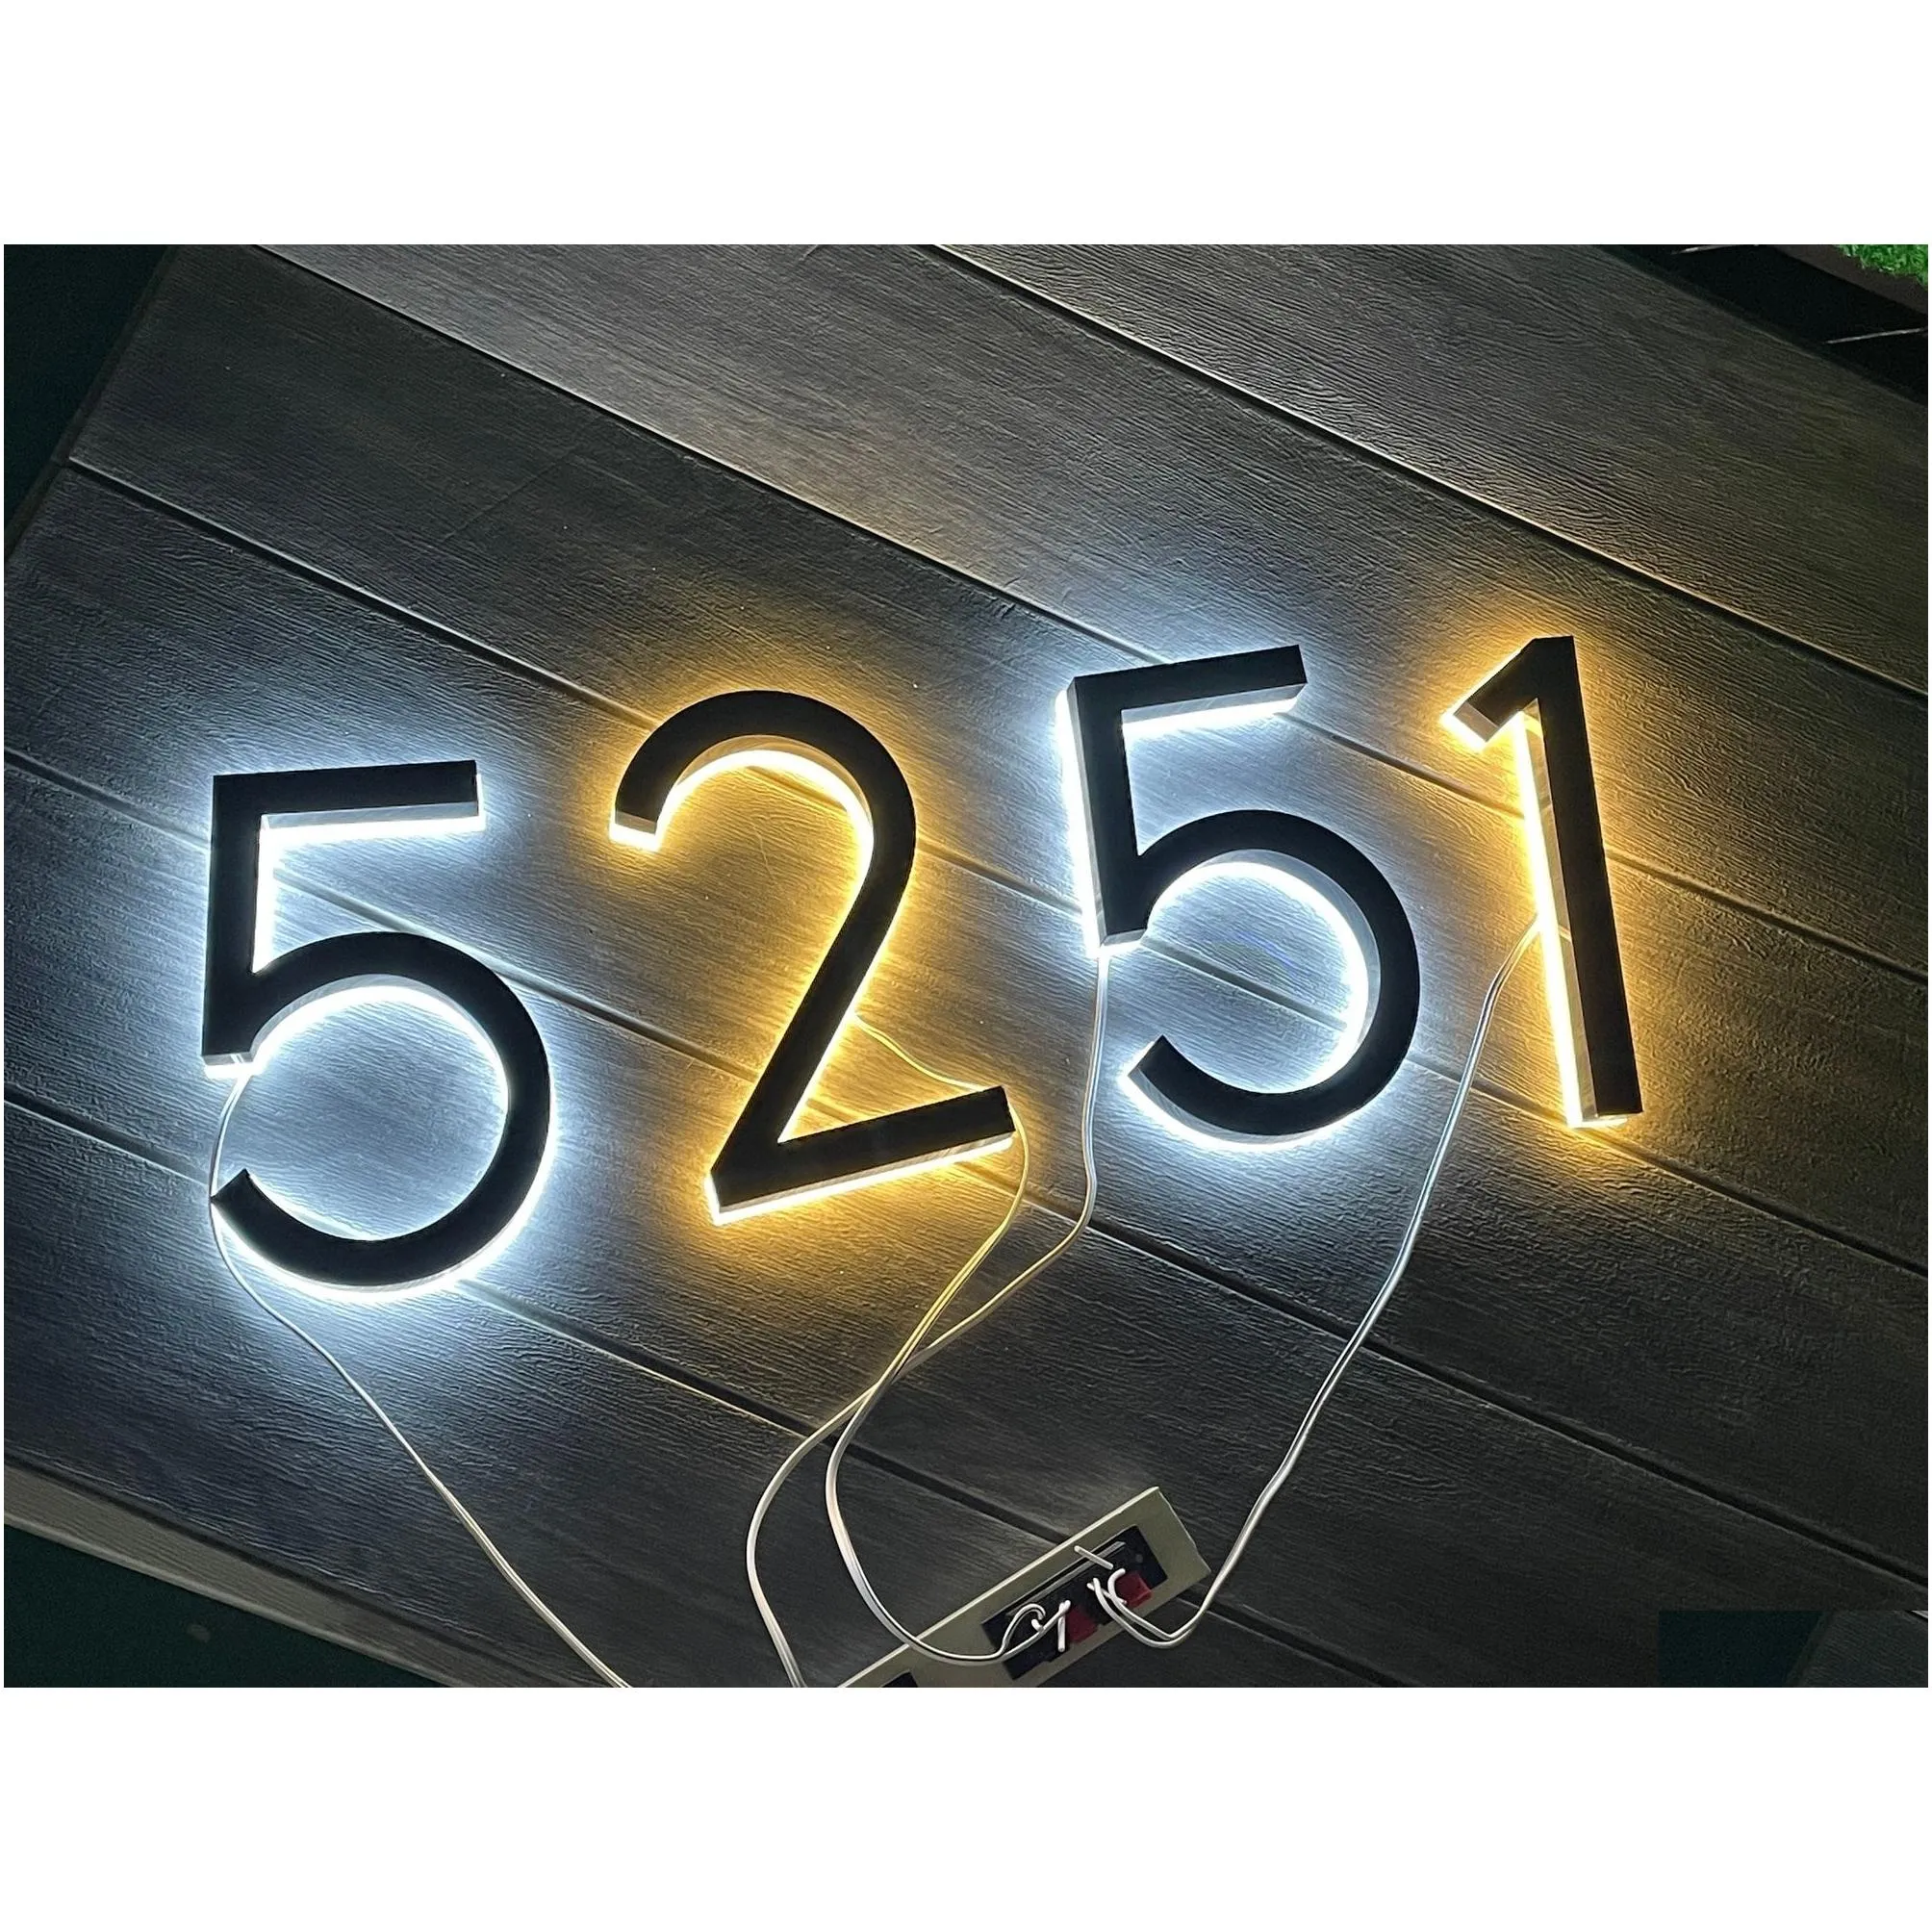 other home decor metal 3d led house numbers light outdoor waterproof el door plates stainless steel luminous letter sign address number